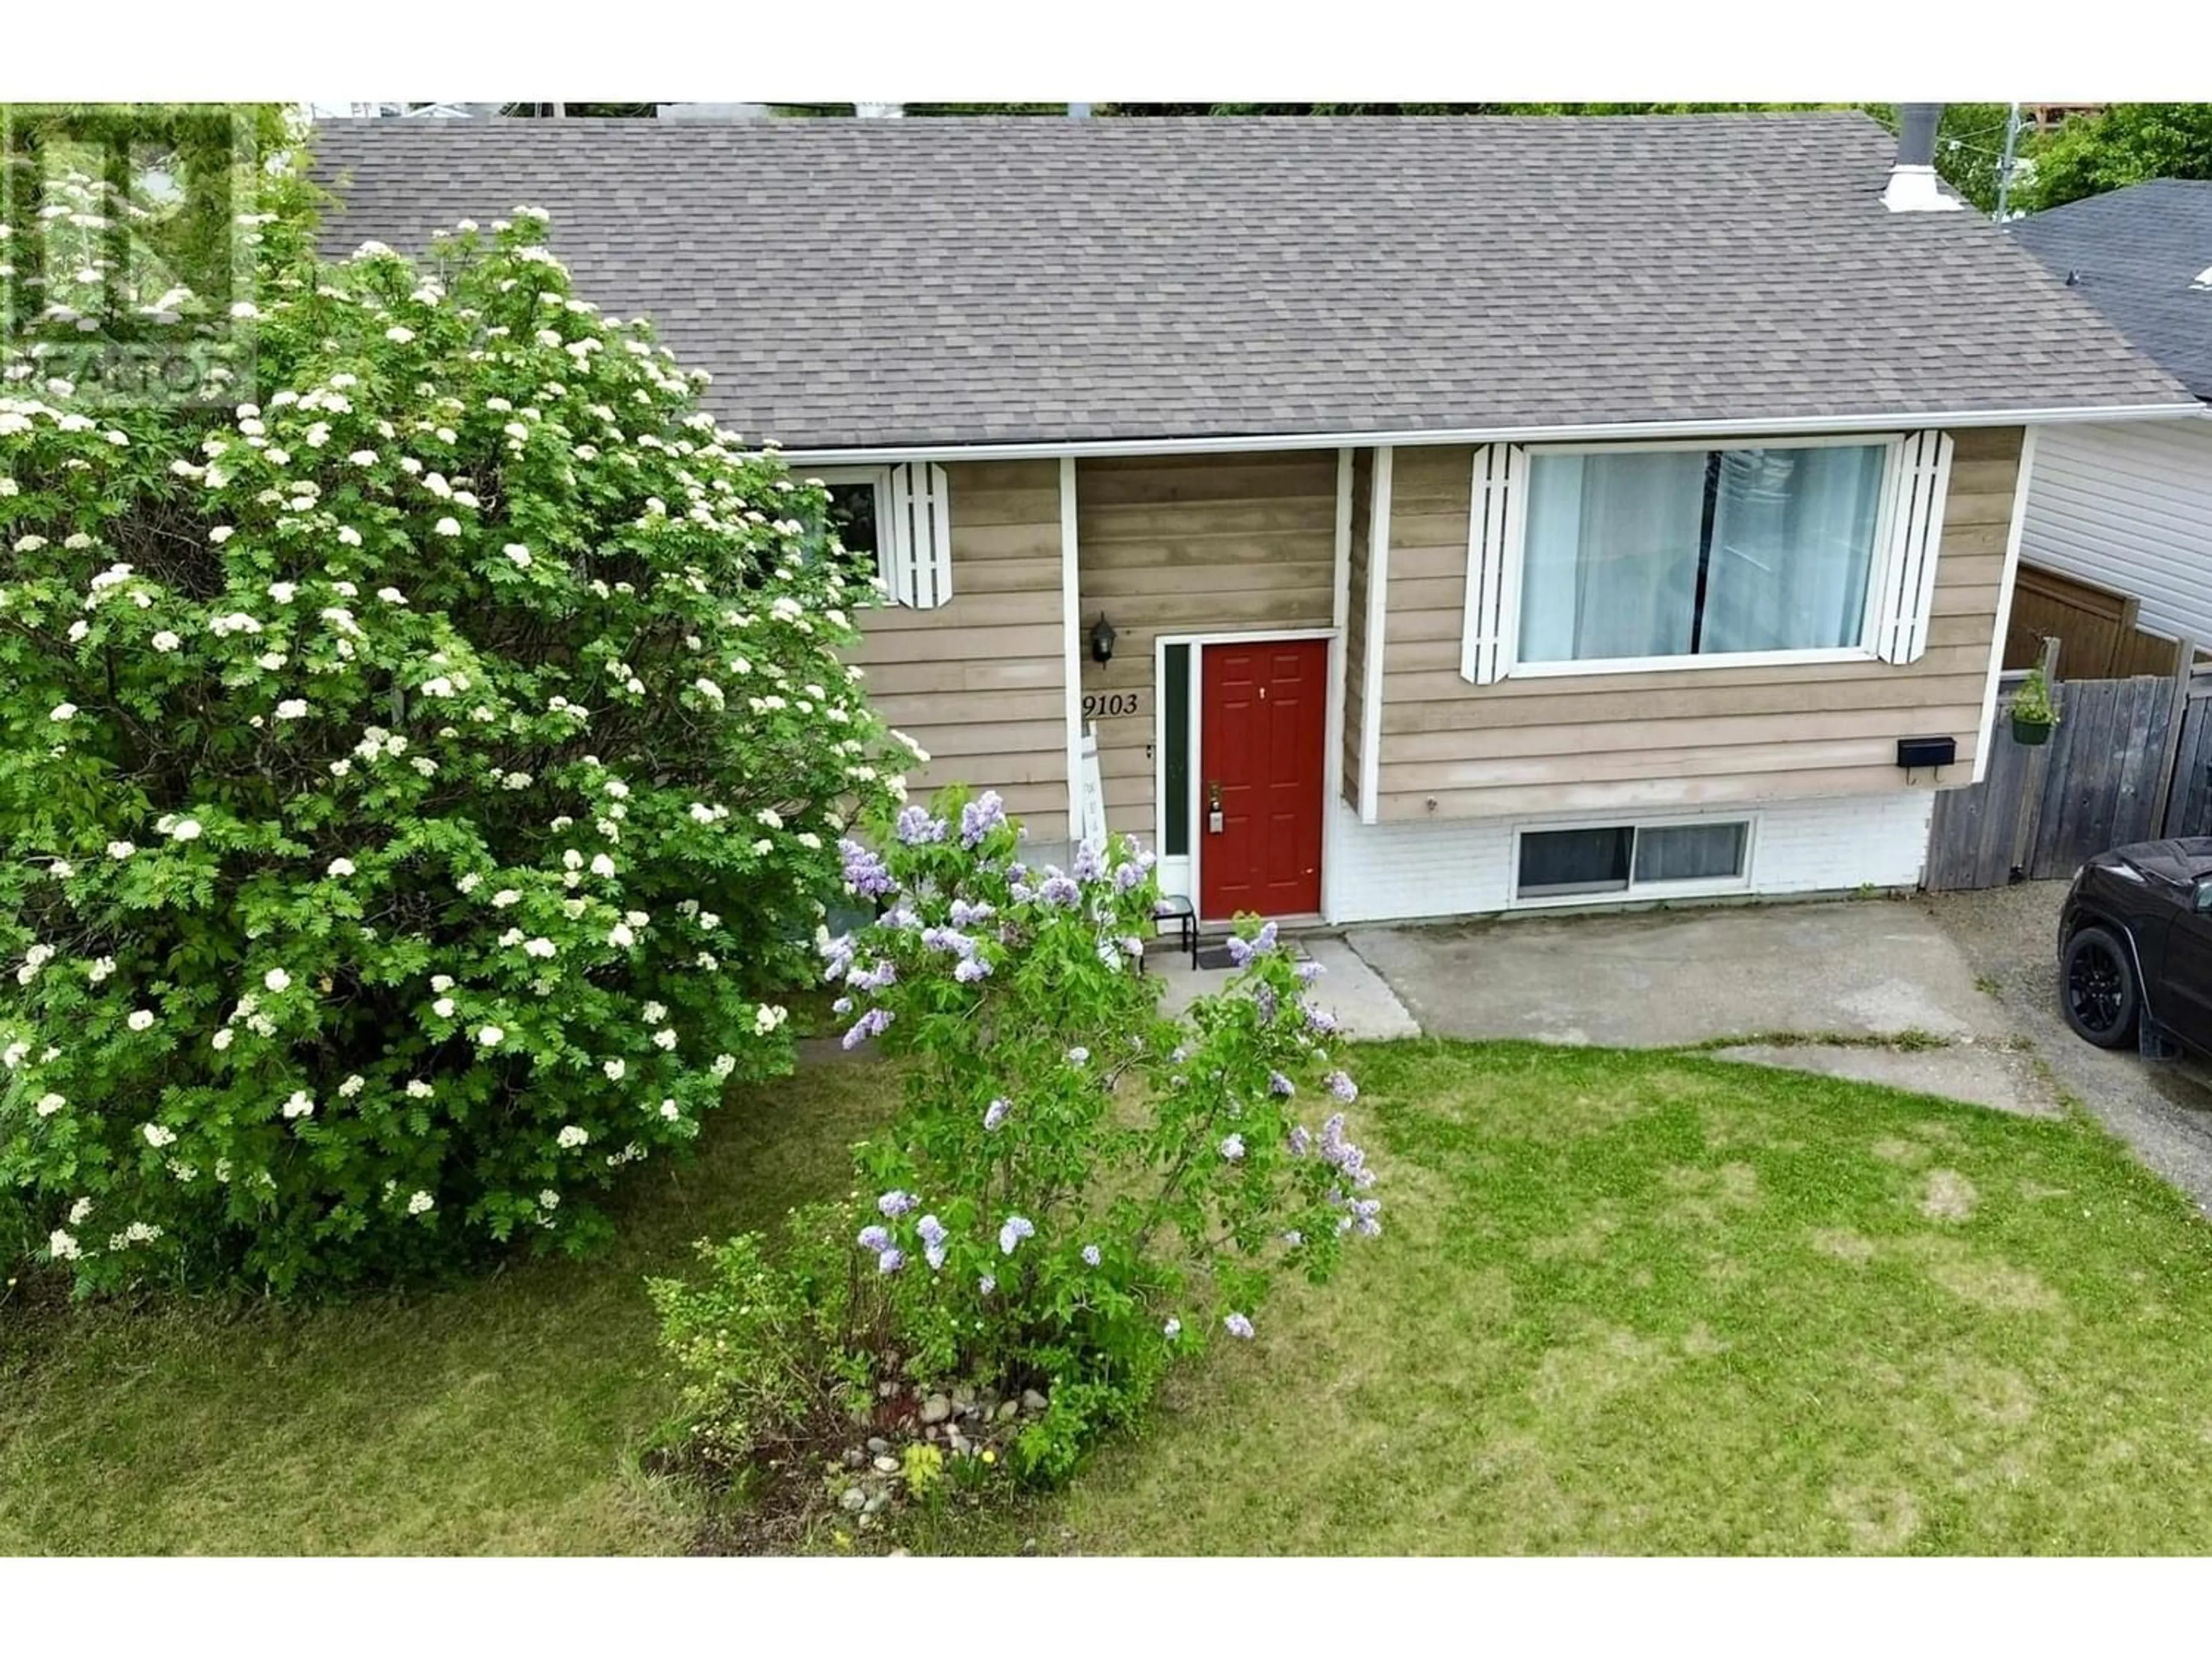 A pic from exterior of the house or condo for 9103 102 AVENUE, Fort St. John British Columbia V1J2G4